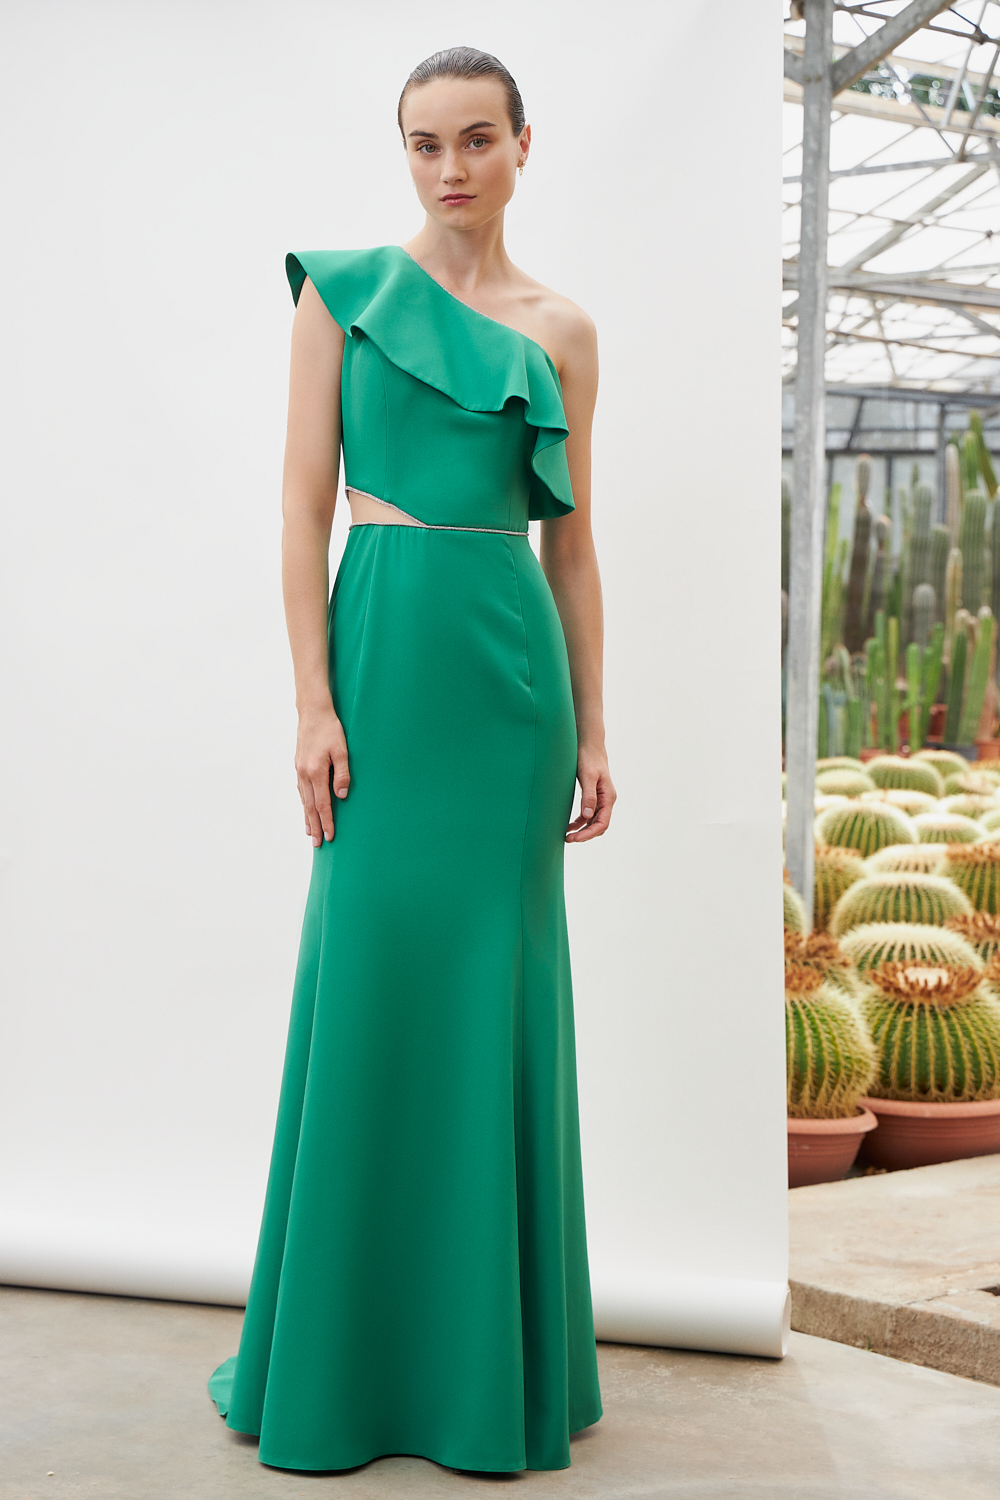 Cocktail Dresses / One shoulder cocktail satin dress with beading at the top and the waist